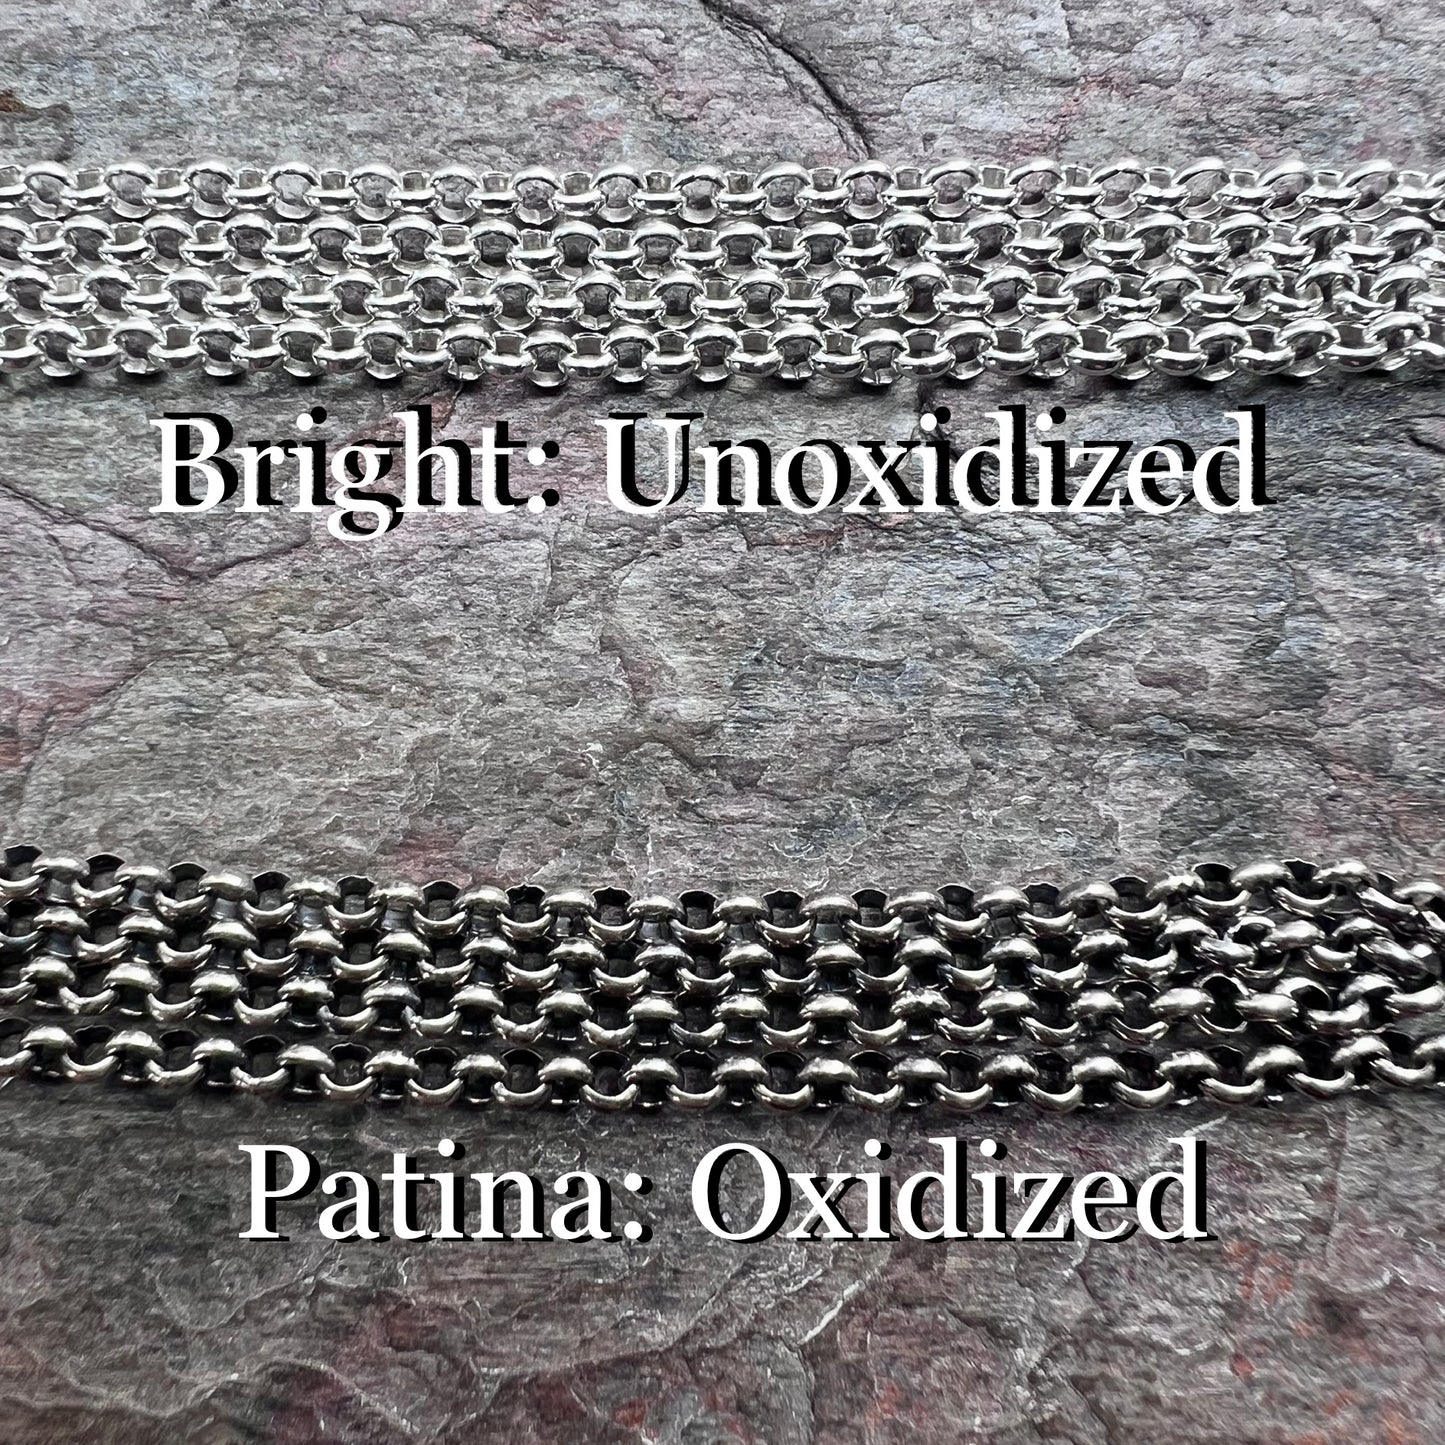 Sterling Silver 2.5mm Rolo Chain - Adjustable Chain with Extender